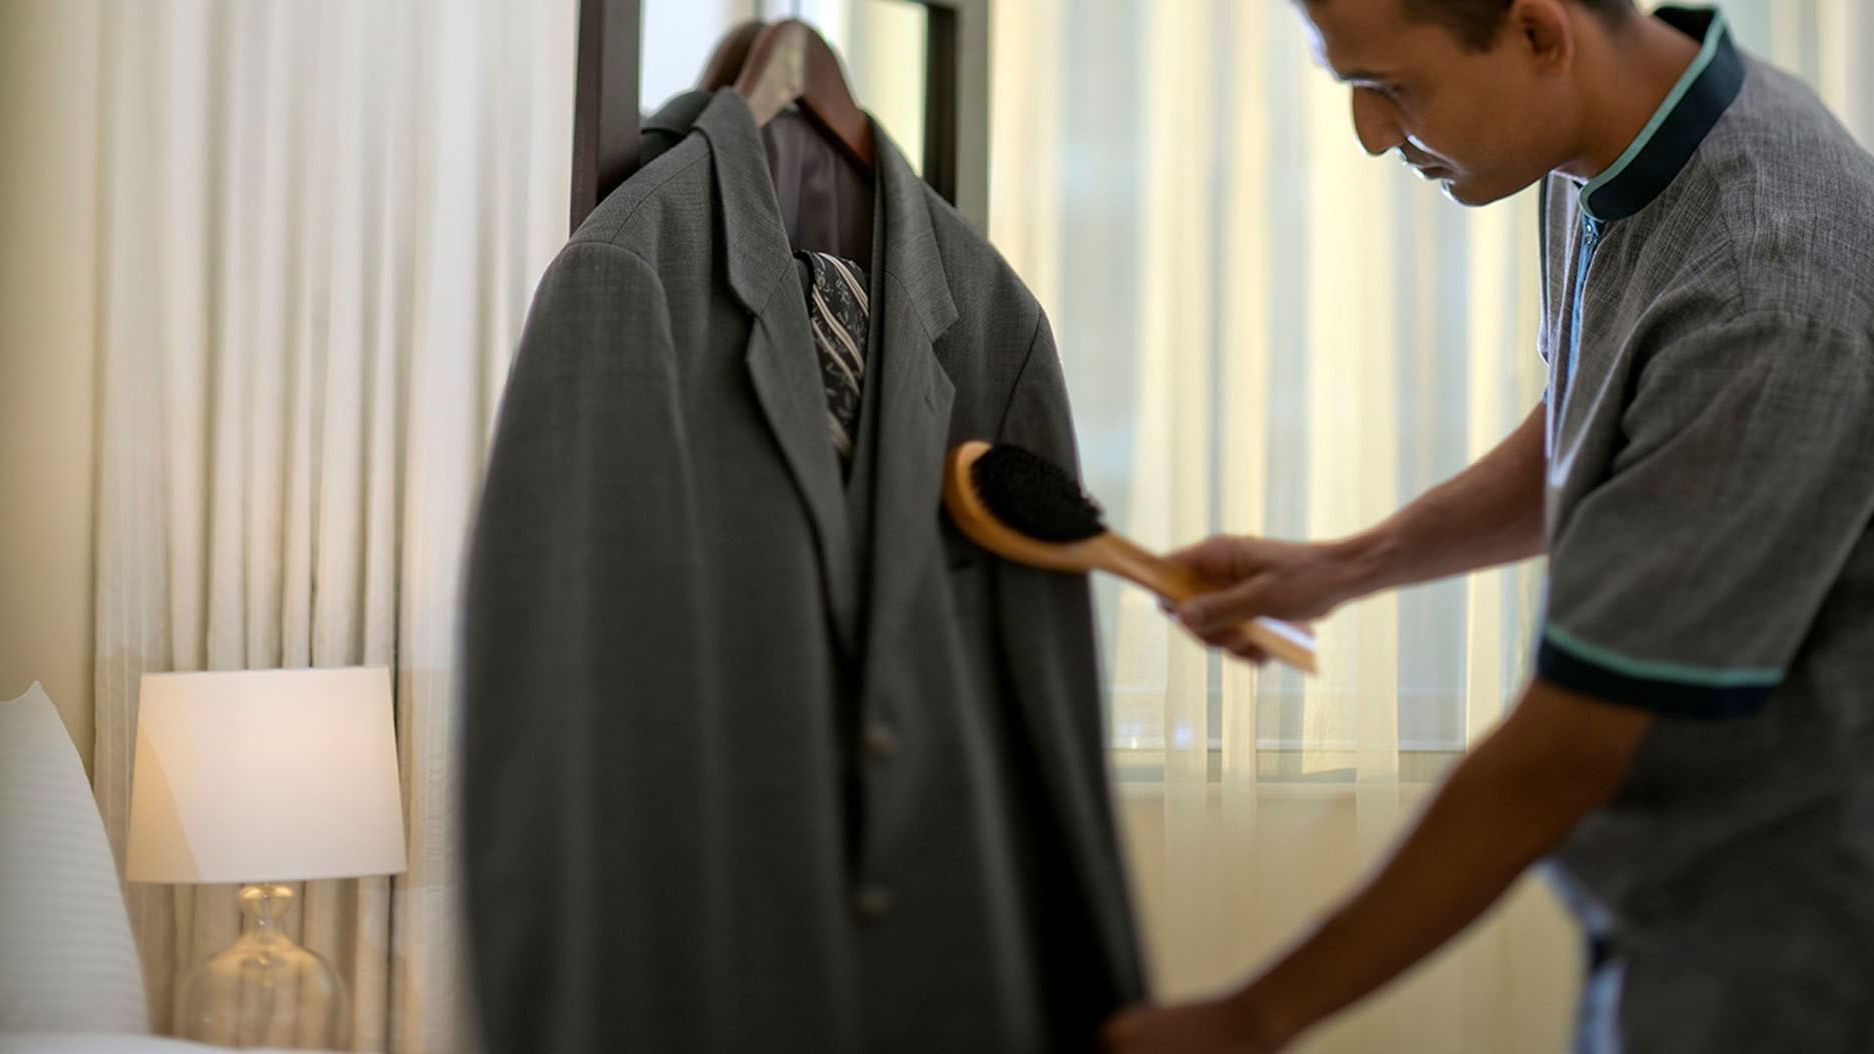 A man meticulously brushes a suit at DAMAC Maison Dubai Mall Street